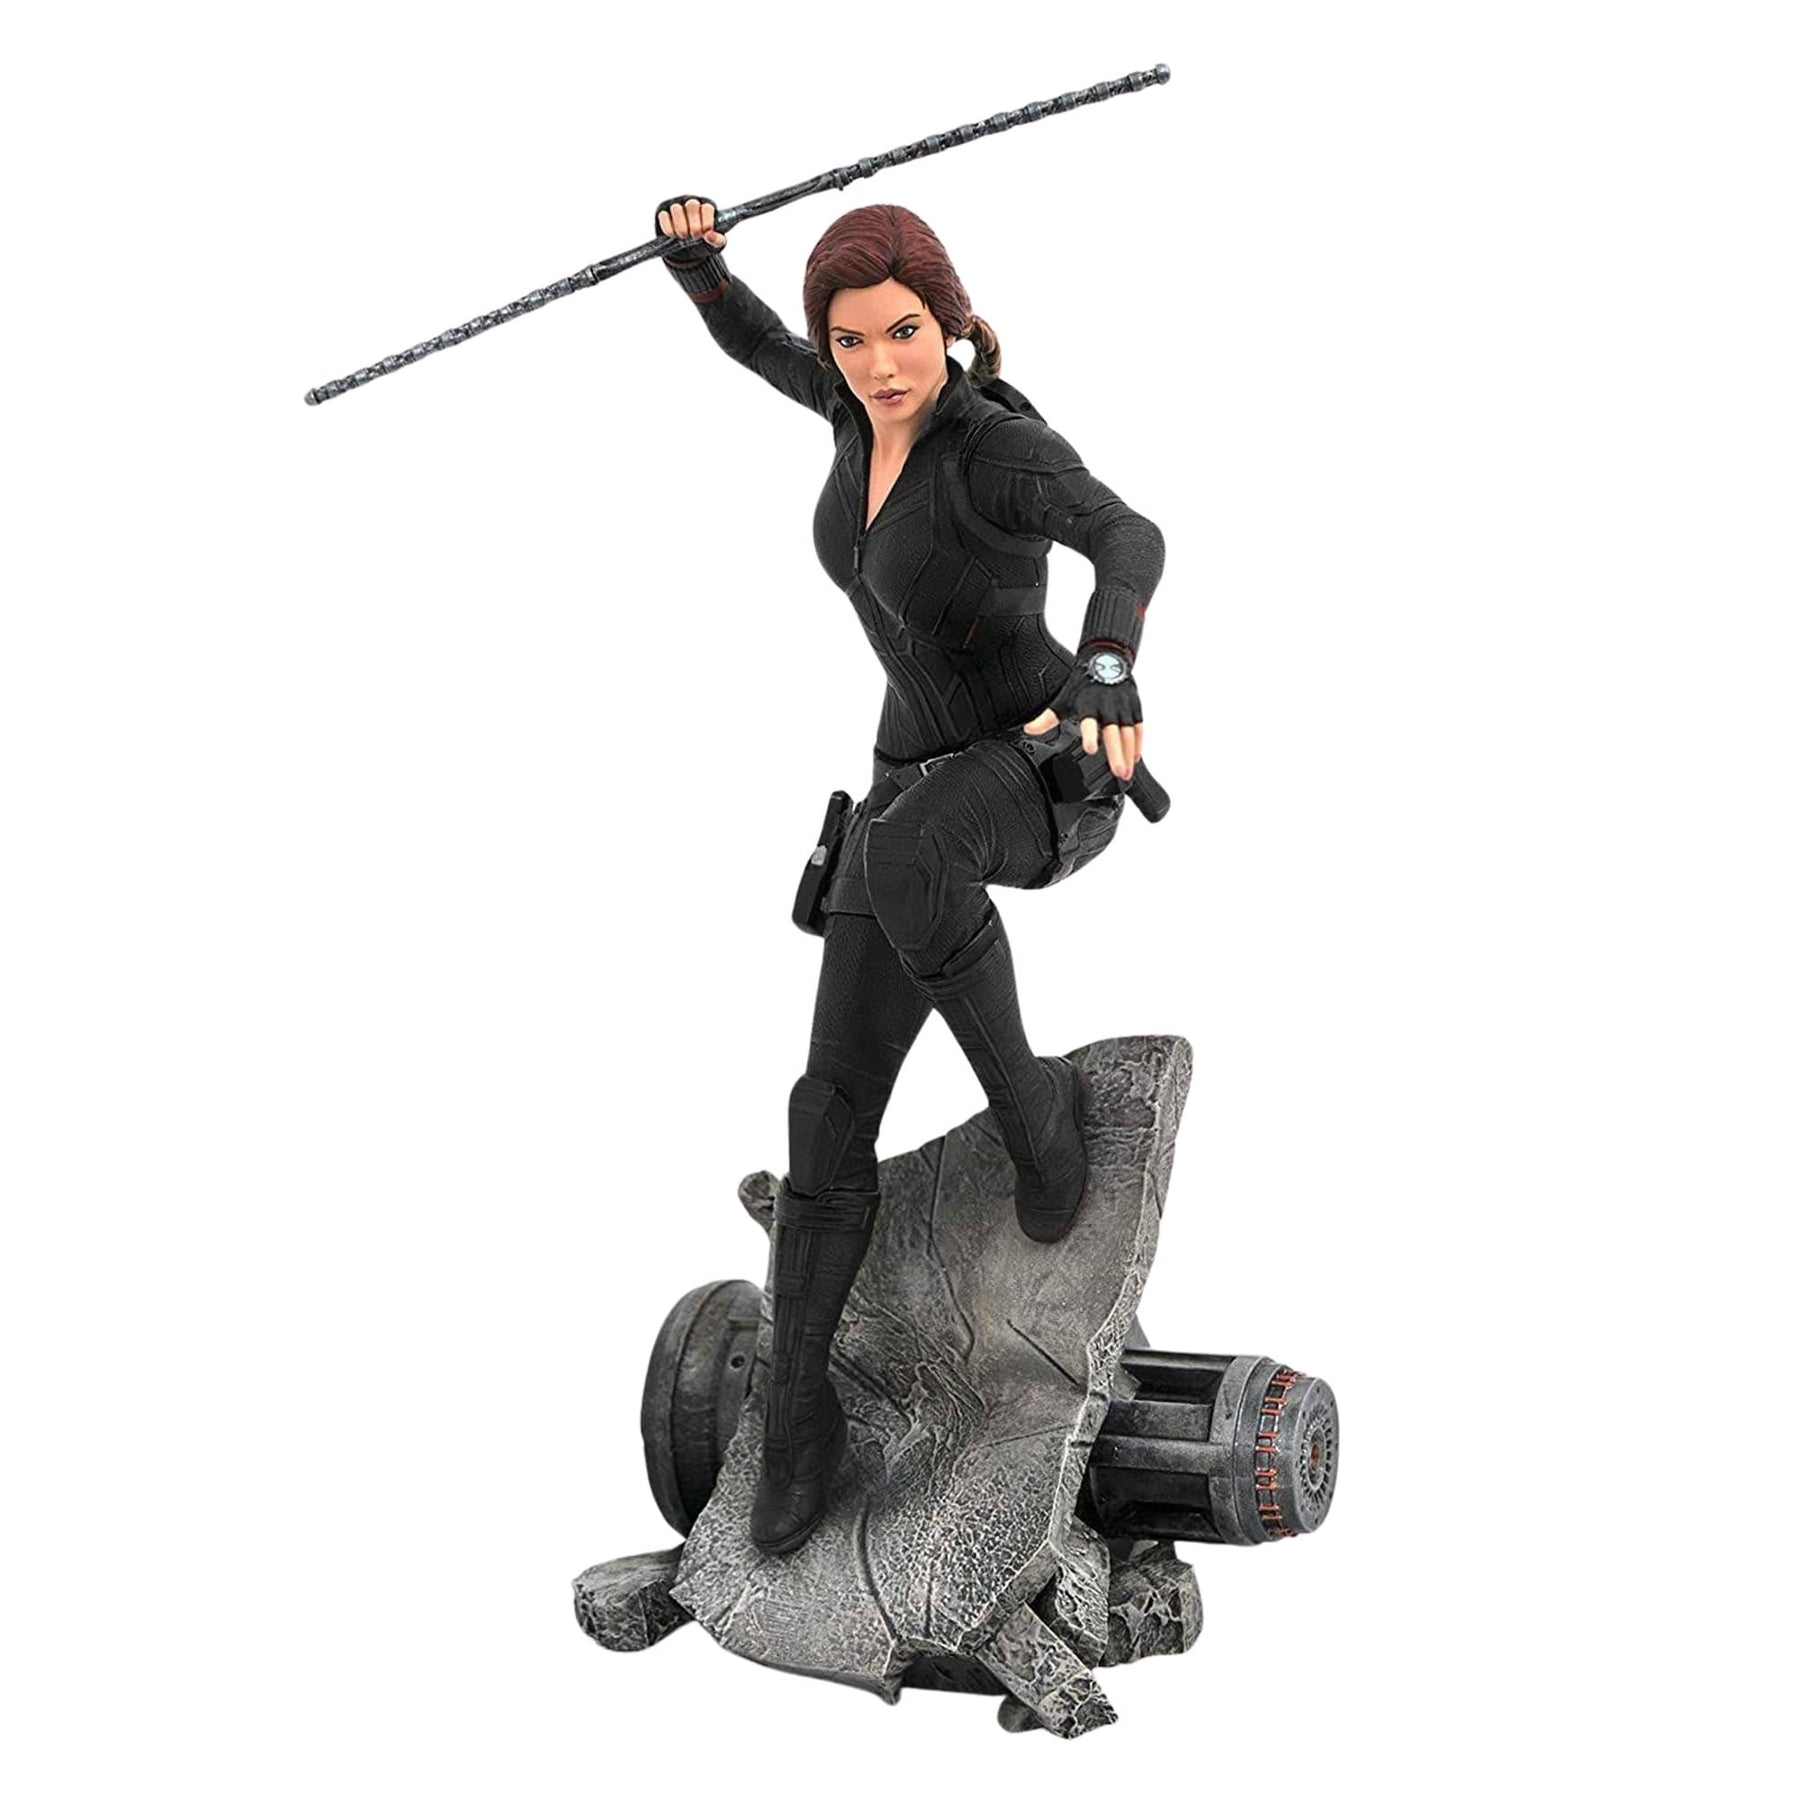 Marvel Premier Collection Endgame Black Widow 12 Inch Resin Statue